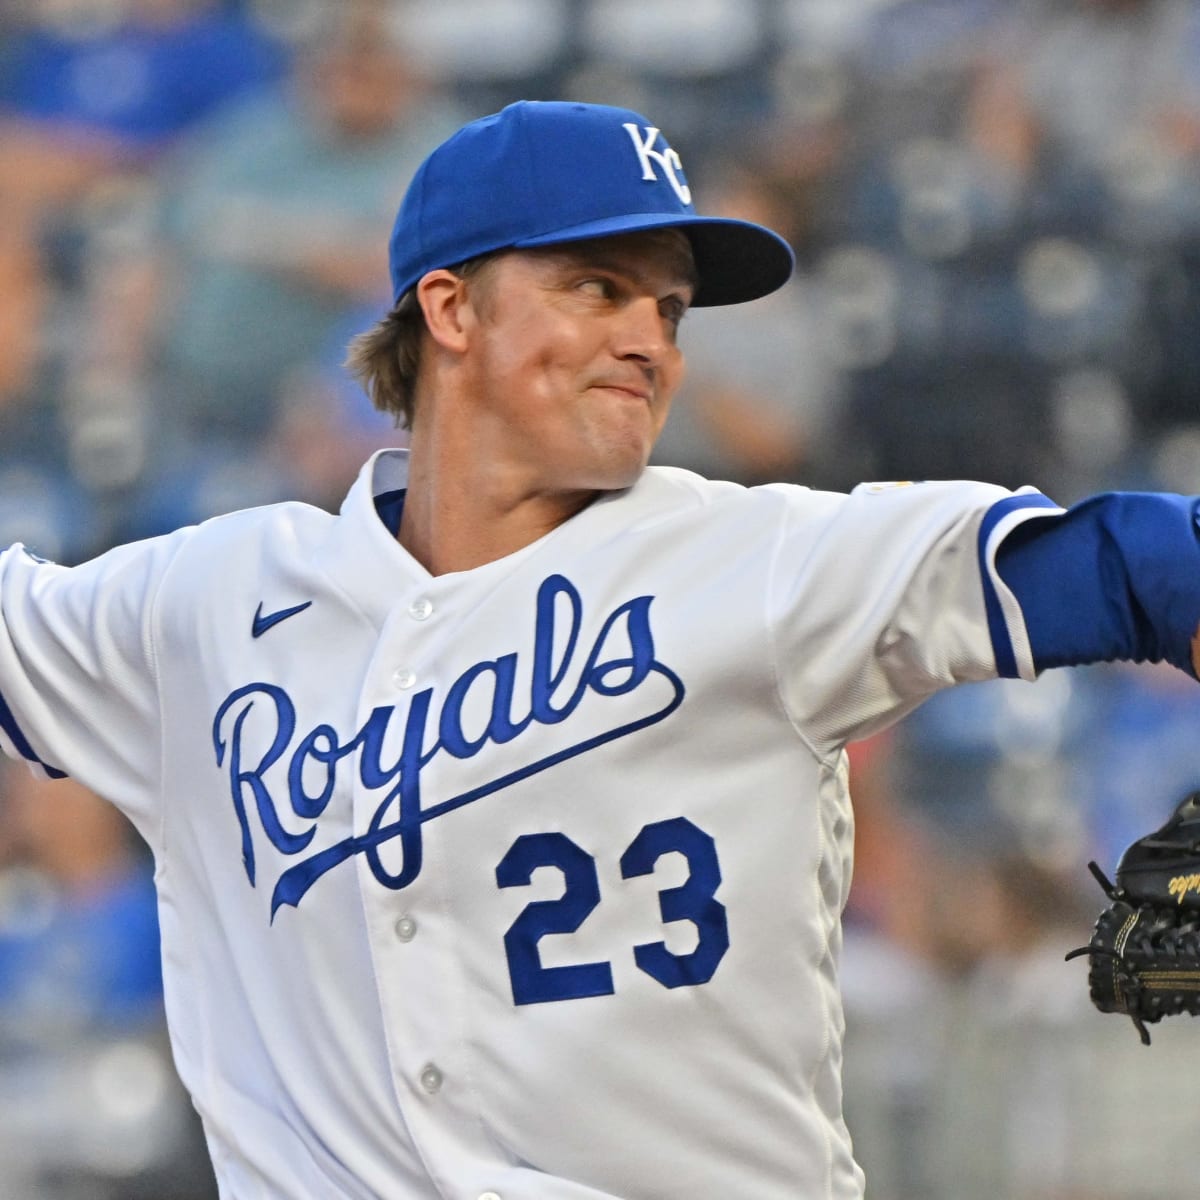 Kansas City Royals ace Zack Greinke claims American League Cy Young Award 